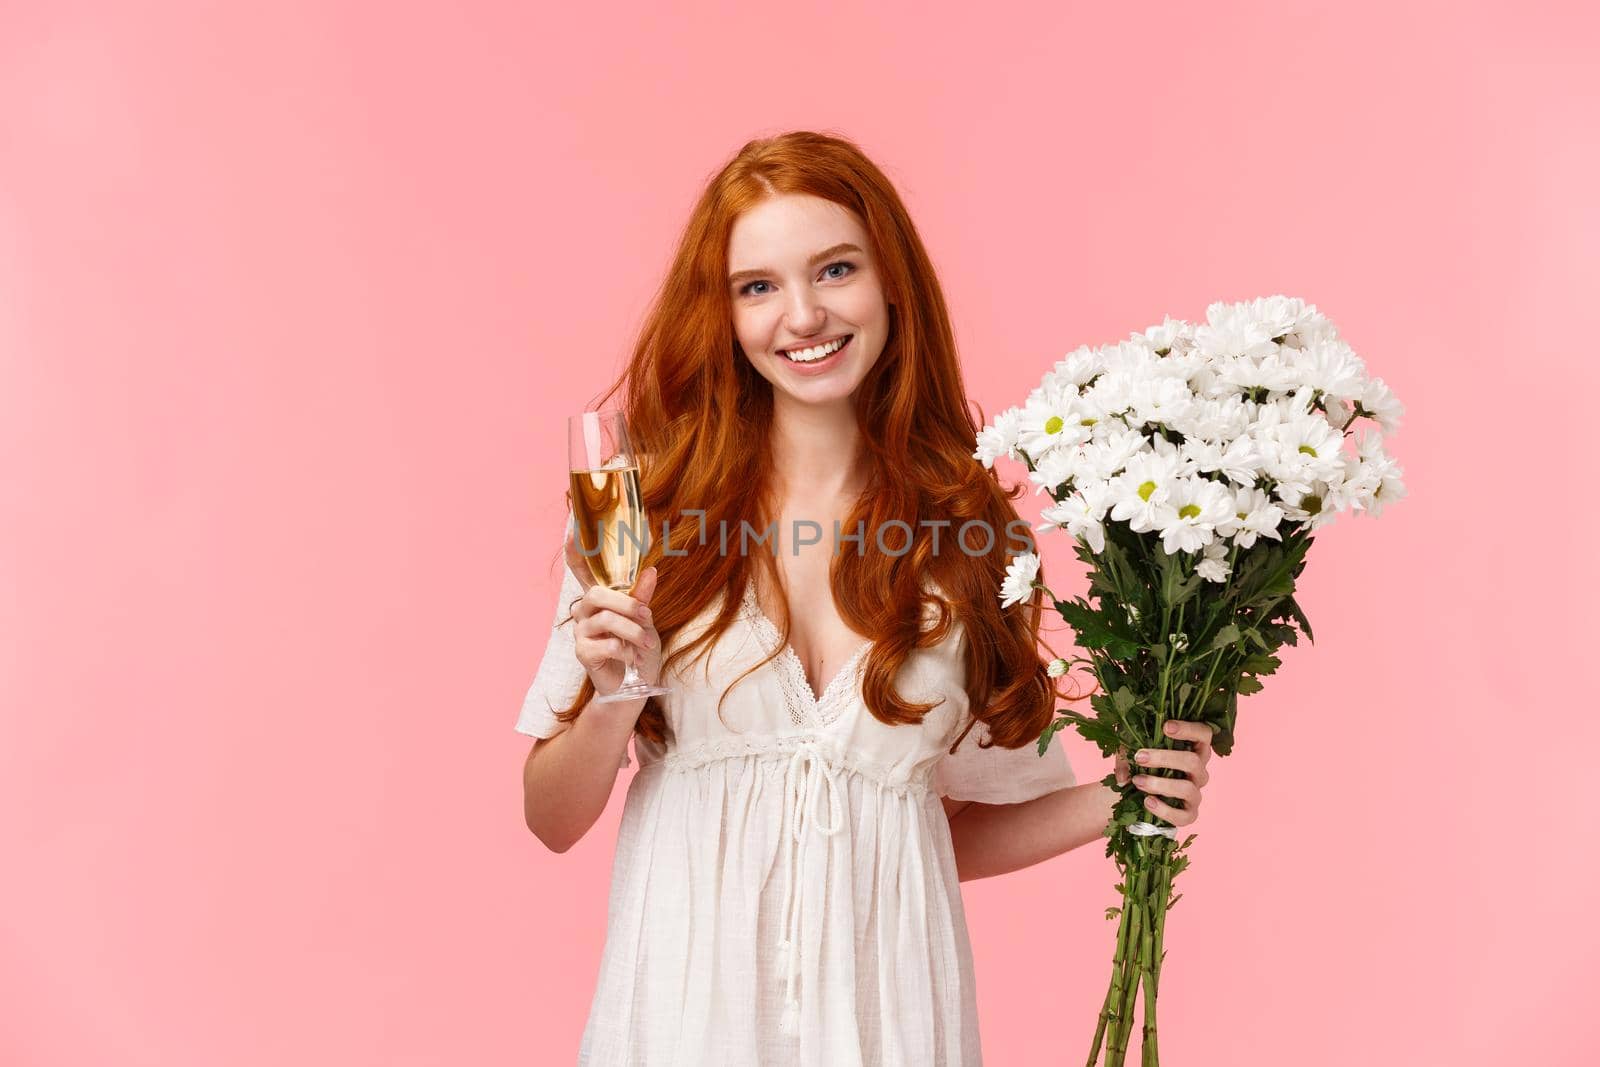 Women day, romantic moments and relationship concept. Charming, alluring caucasian redhead girl raising glass of champagne in cheers gesture to celebrate, hold bouquet flowers.